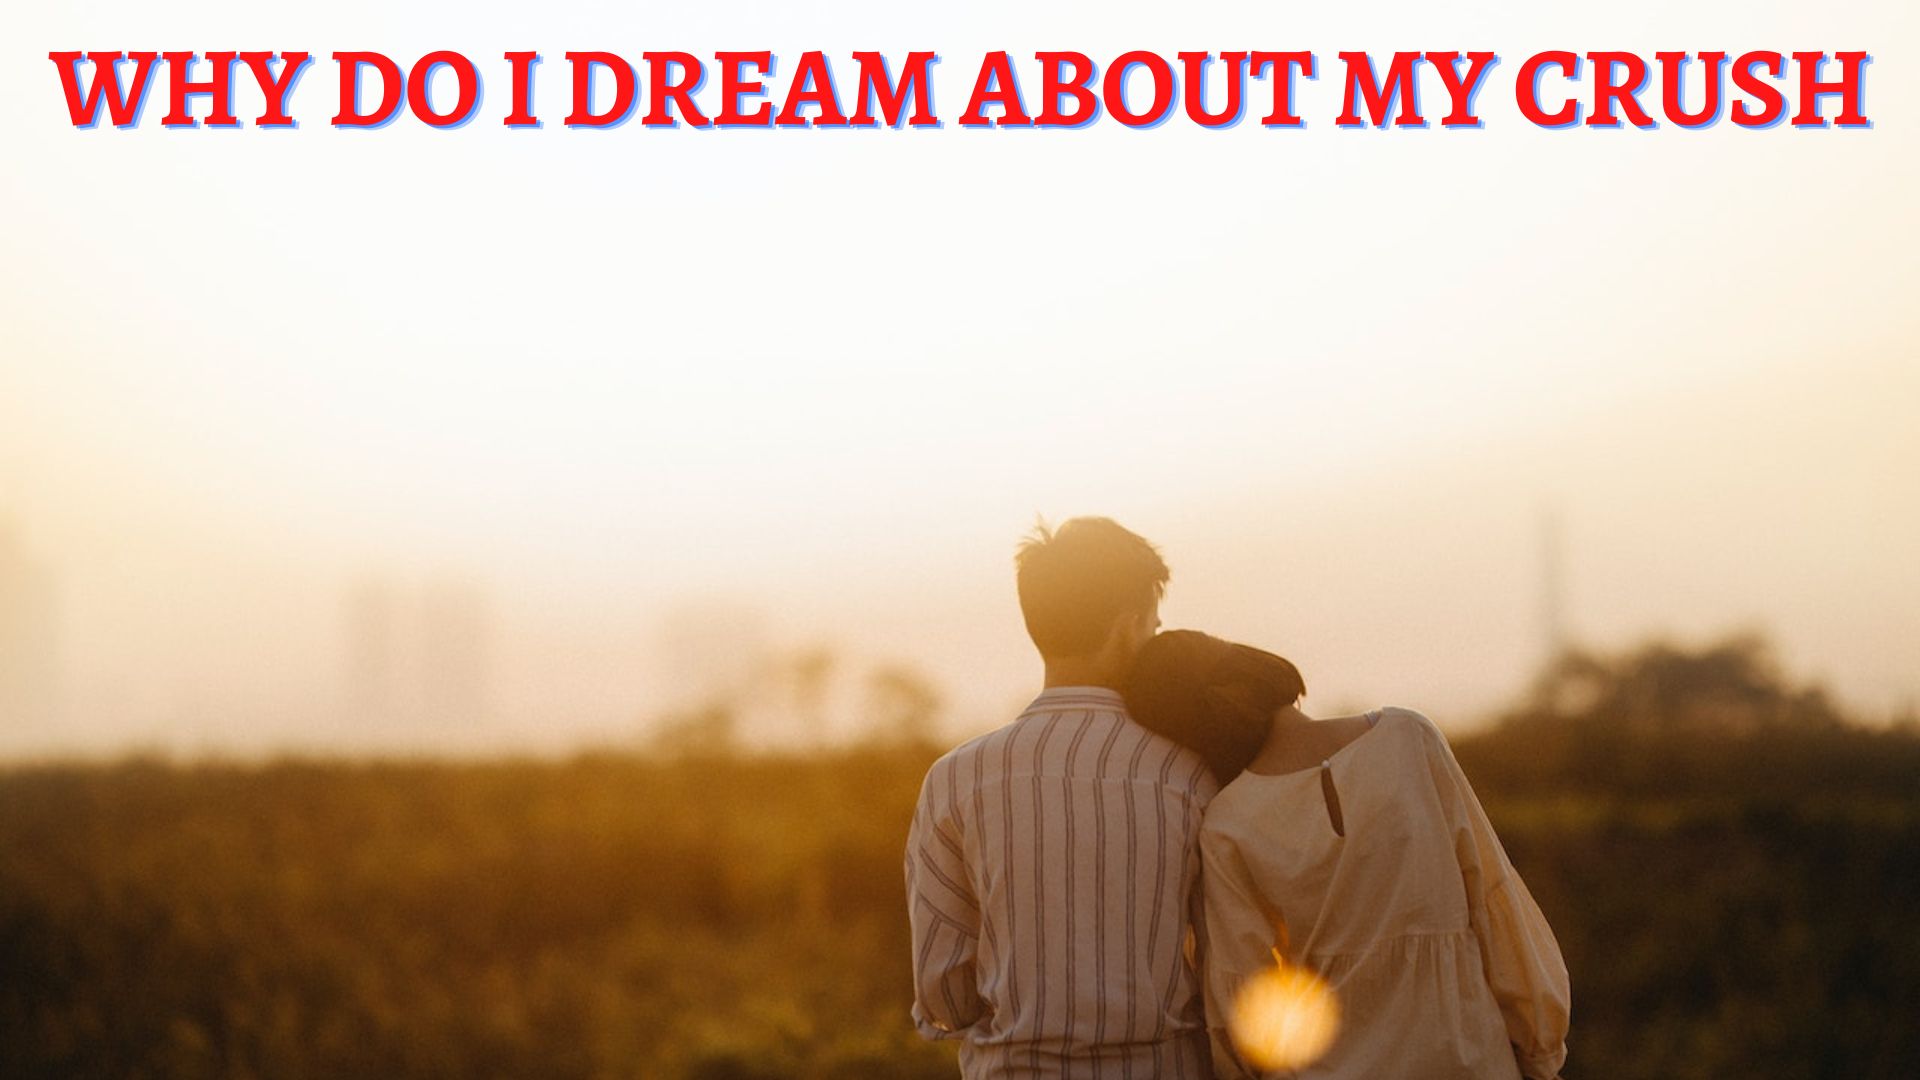 Why Do I Dream About My Crush?